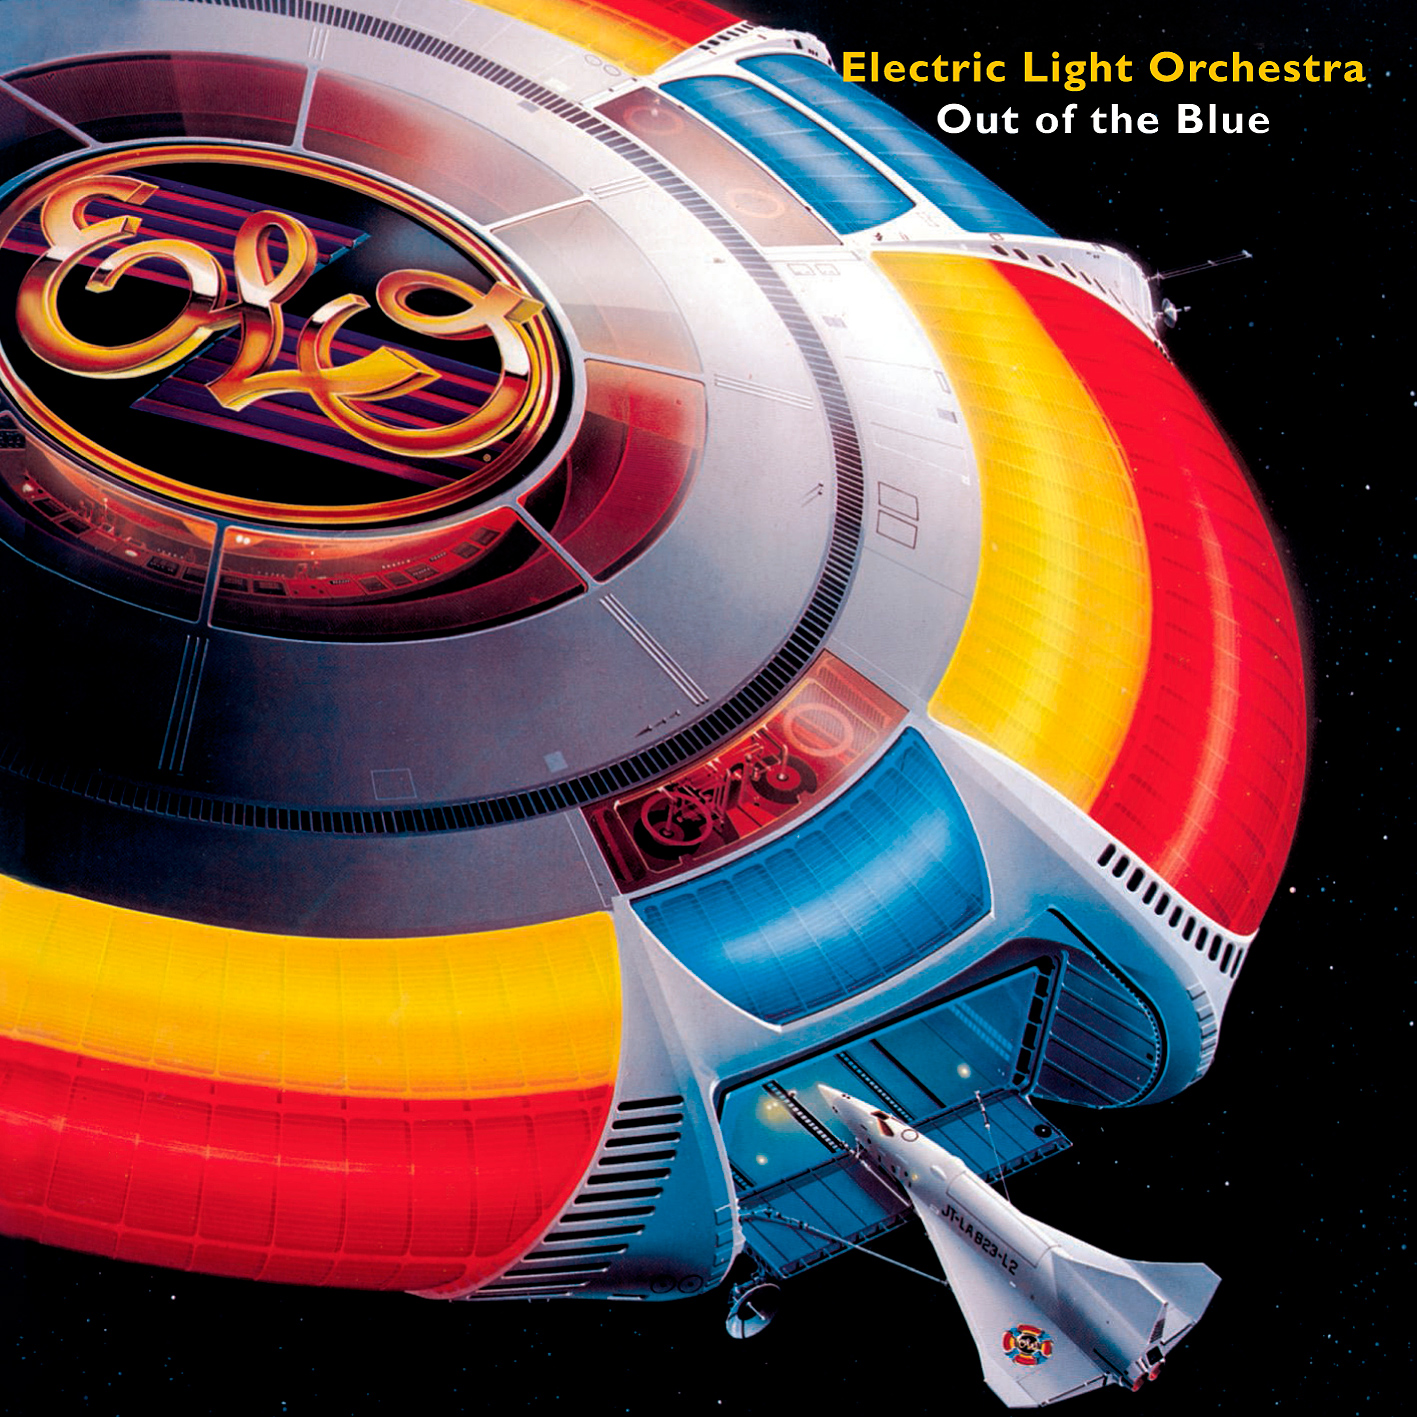 Electric Light Orchestra - Out Of The Blue (1977/2015) [HDTracks FLAC 24bit/192kHz]